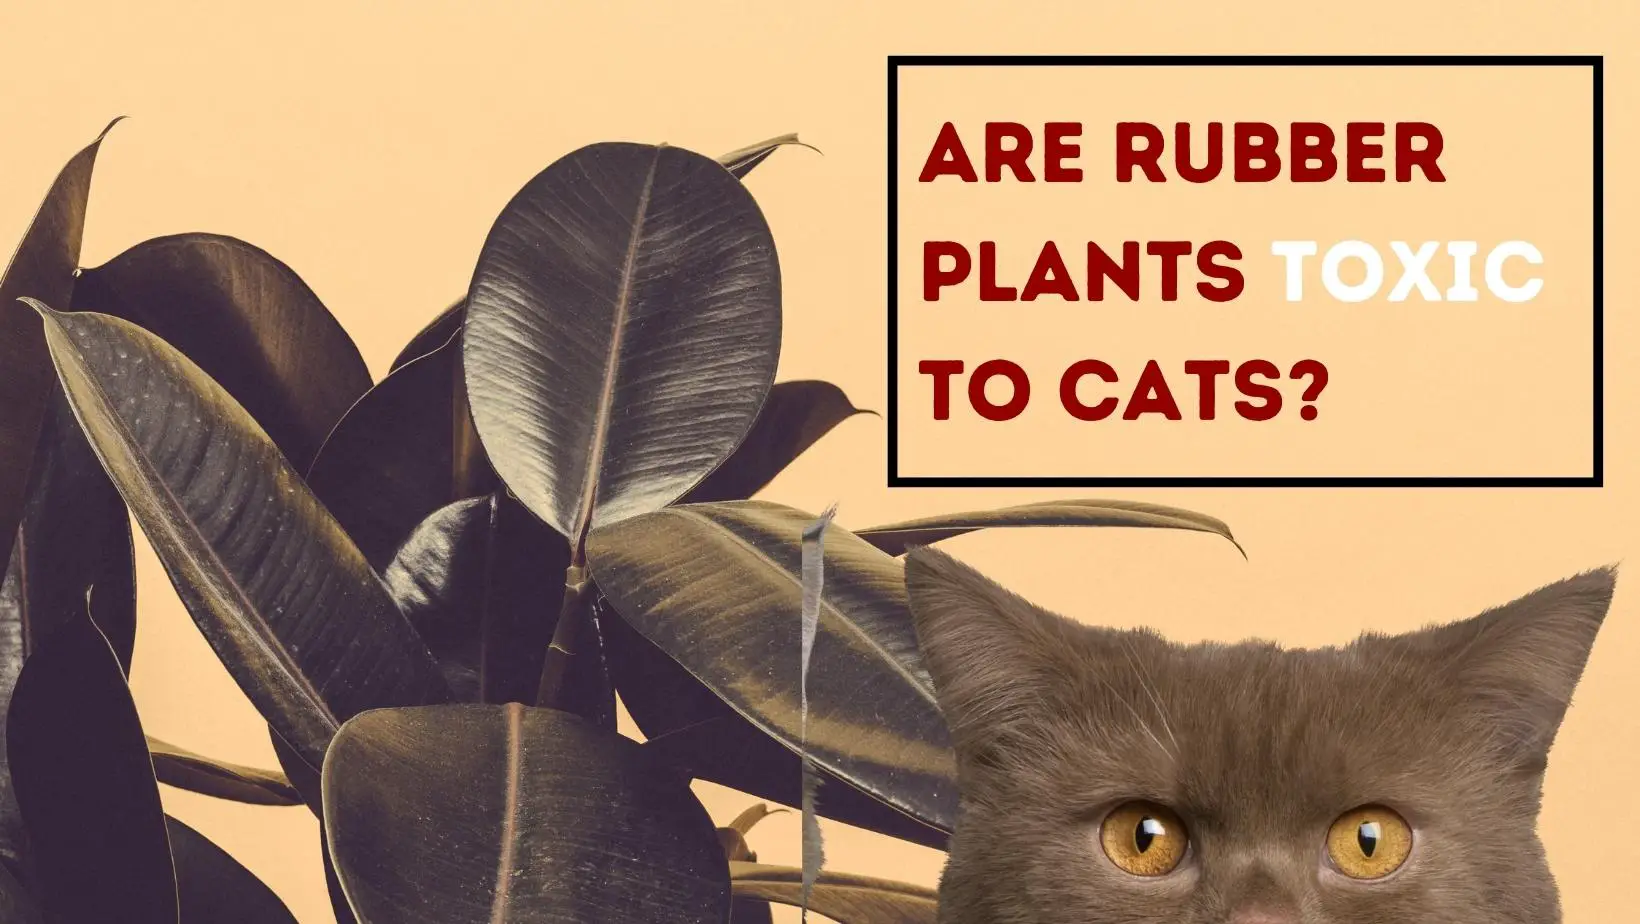 Are Rubber Plants Toxic to Cats?